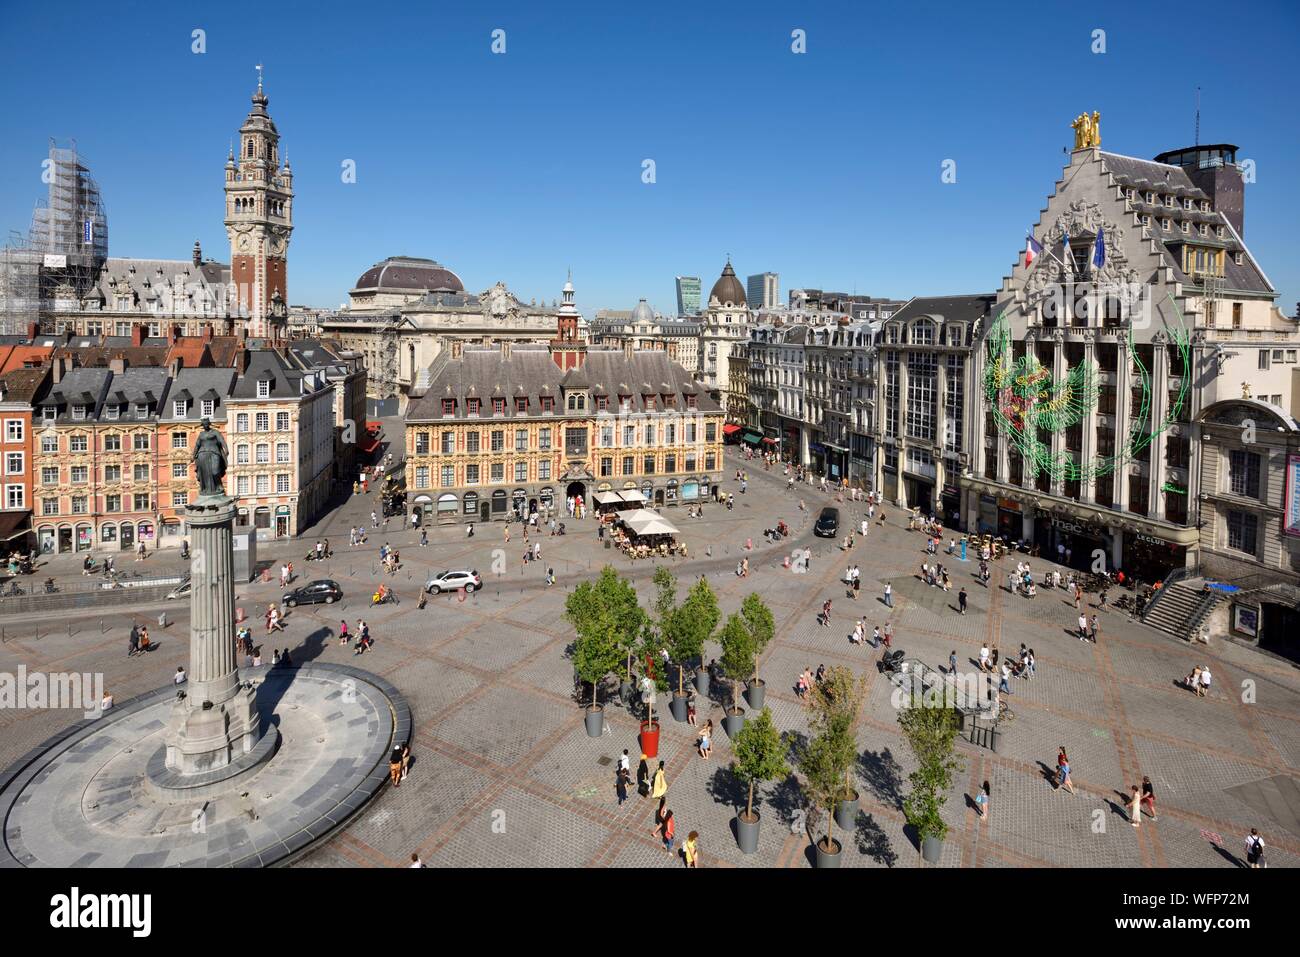 France, Nord, Lille, Place du General De Gaulle or Grand Place, statue of the goddess on its column with the old stock exchange and the belfry of the Chamber of Commerce and Industry in the background Stock Photo